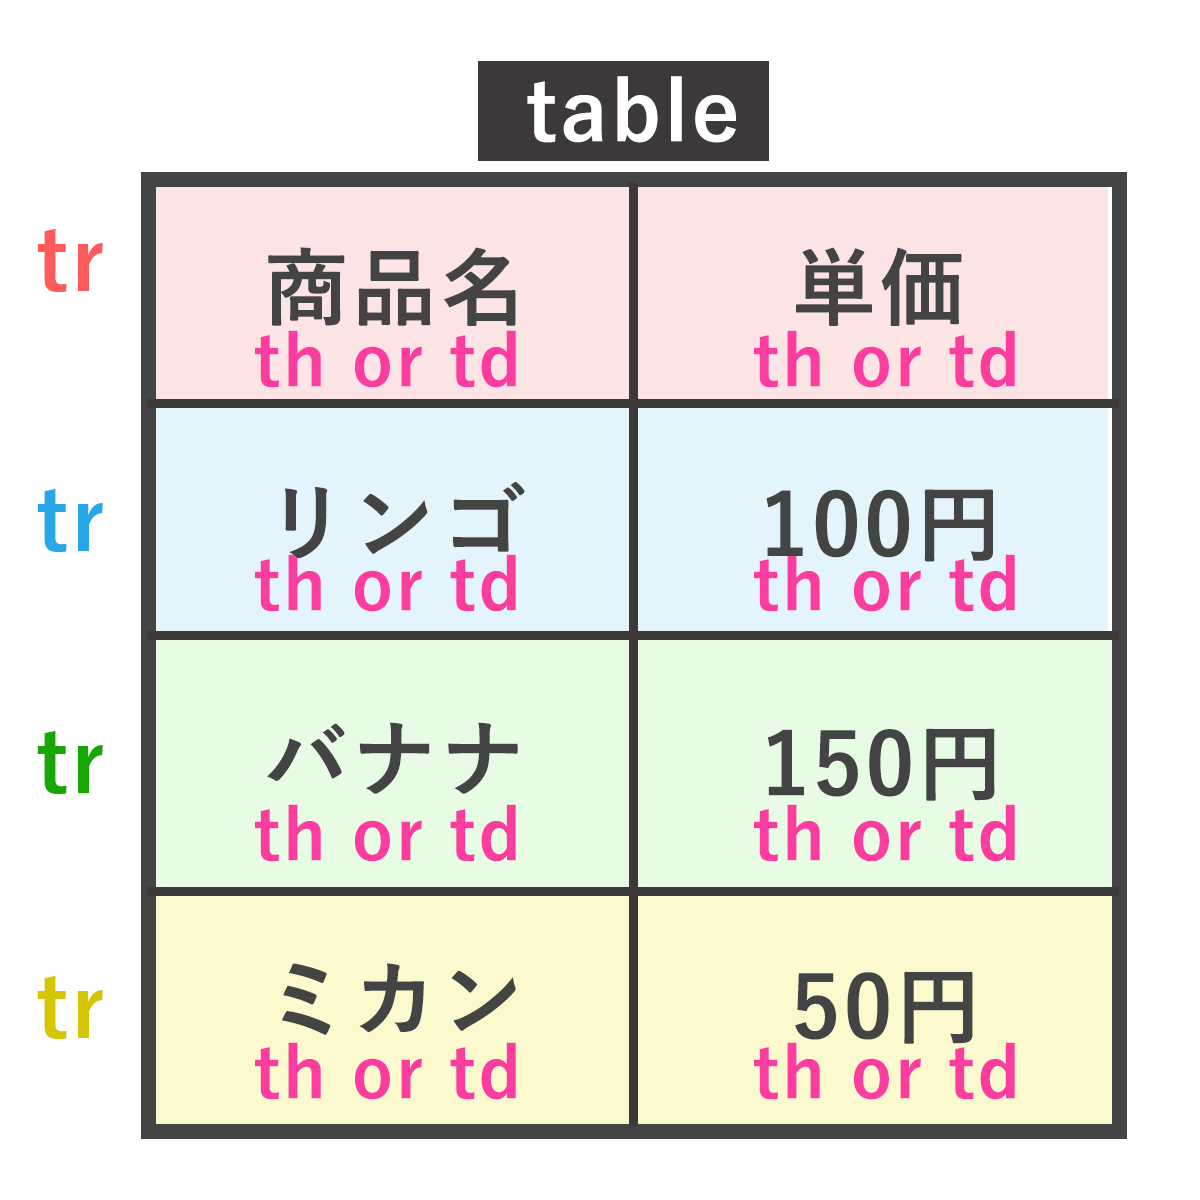 tableタグの説明